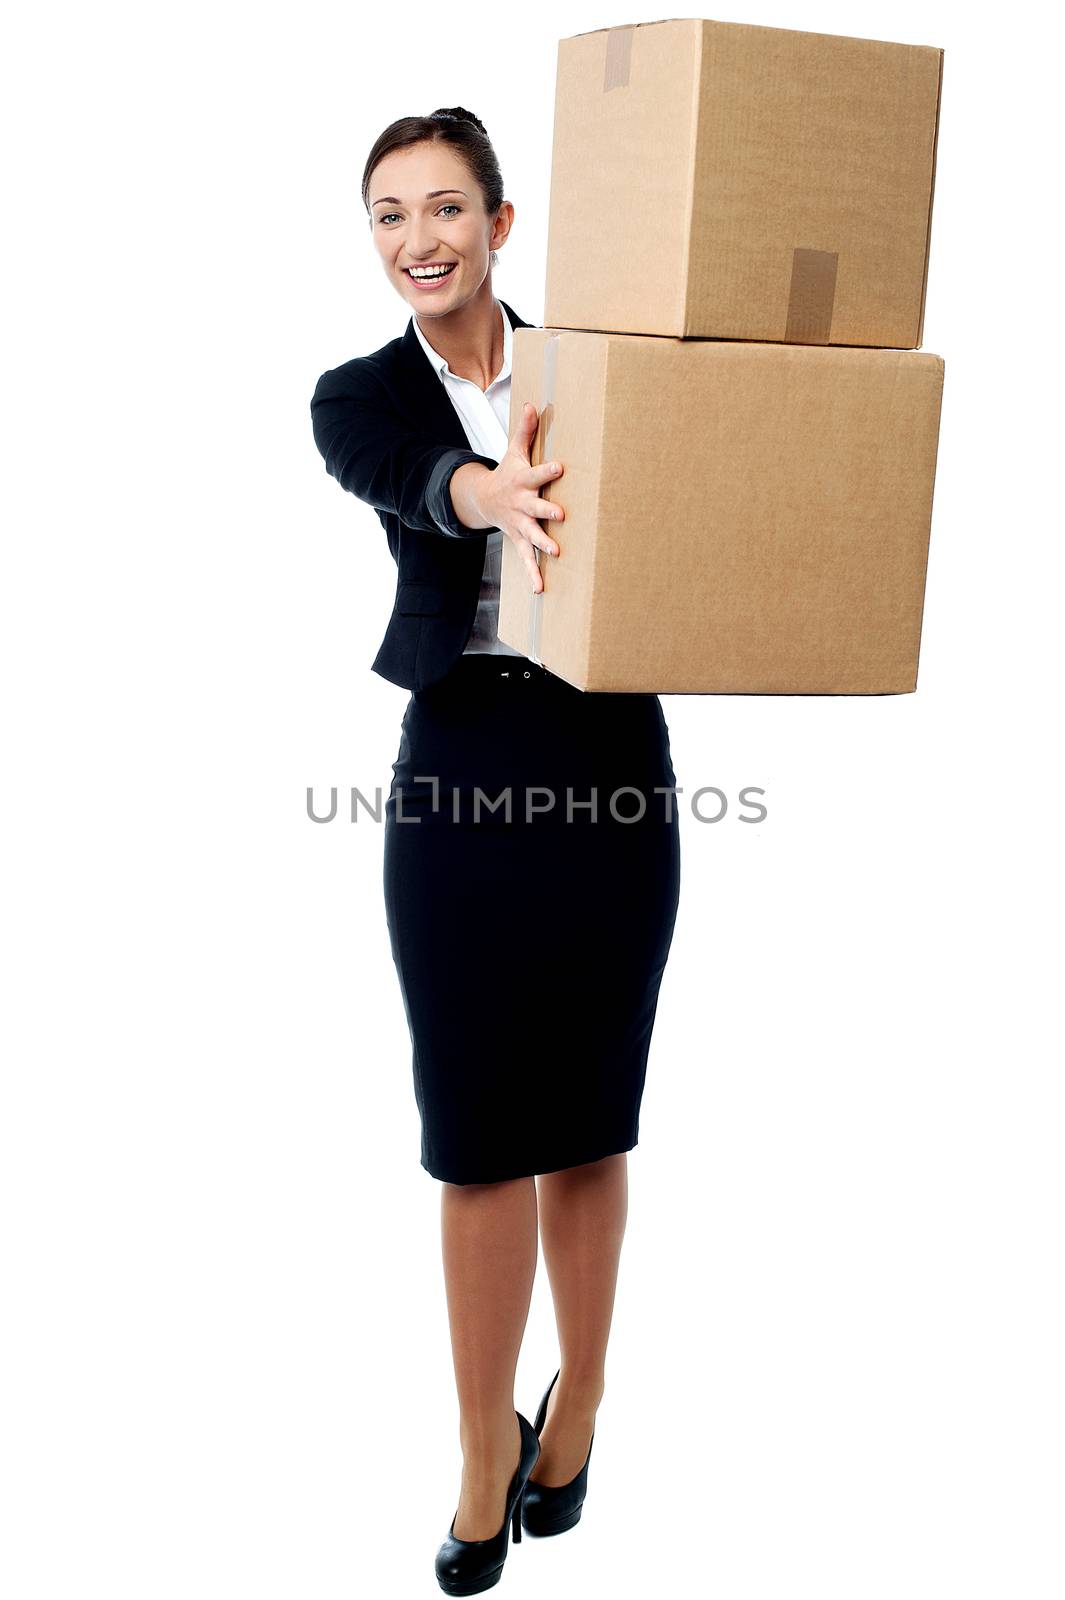 Smiling woman with stack of boxes over white